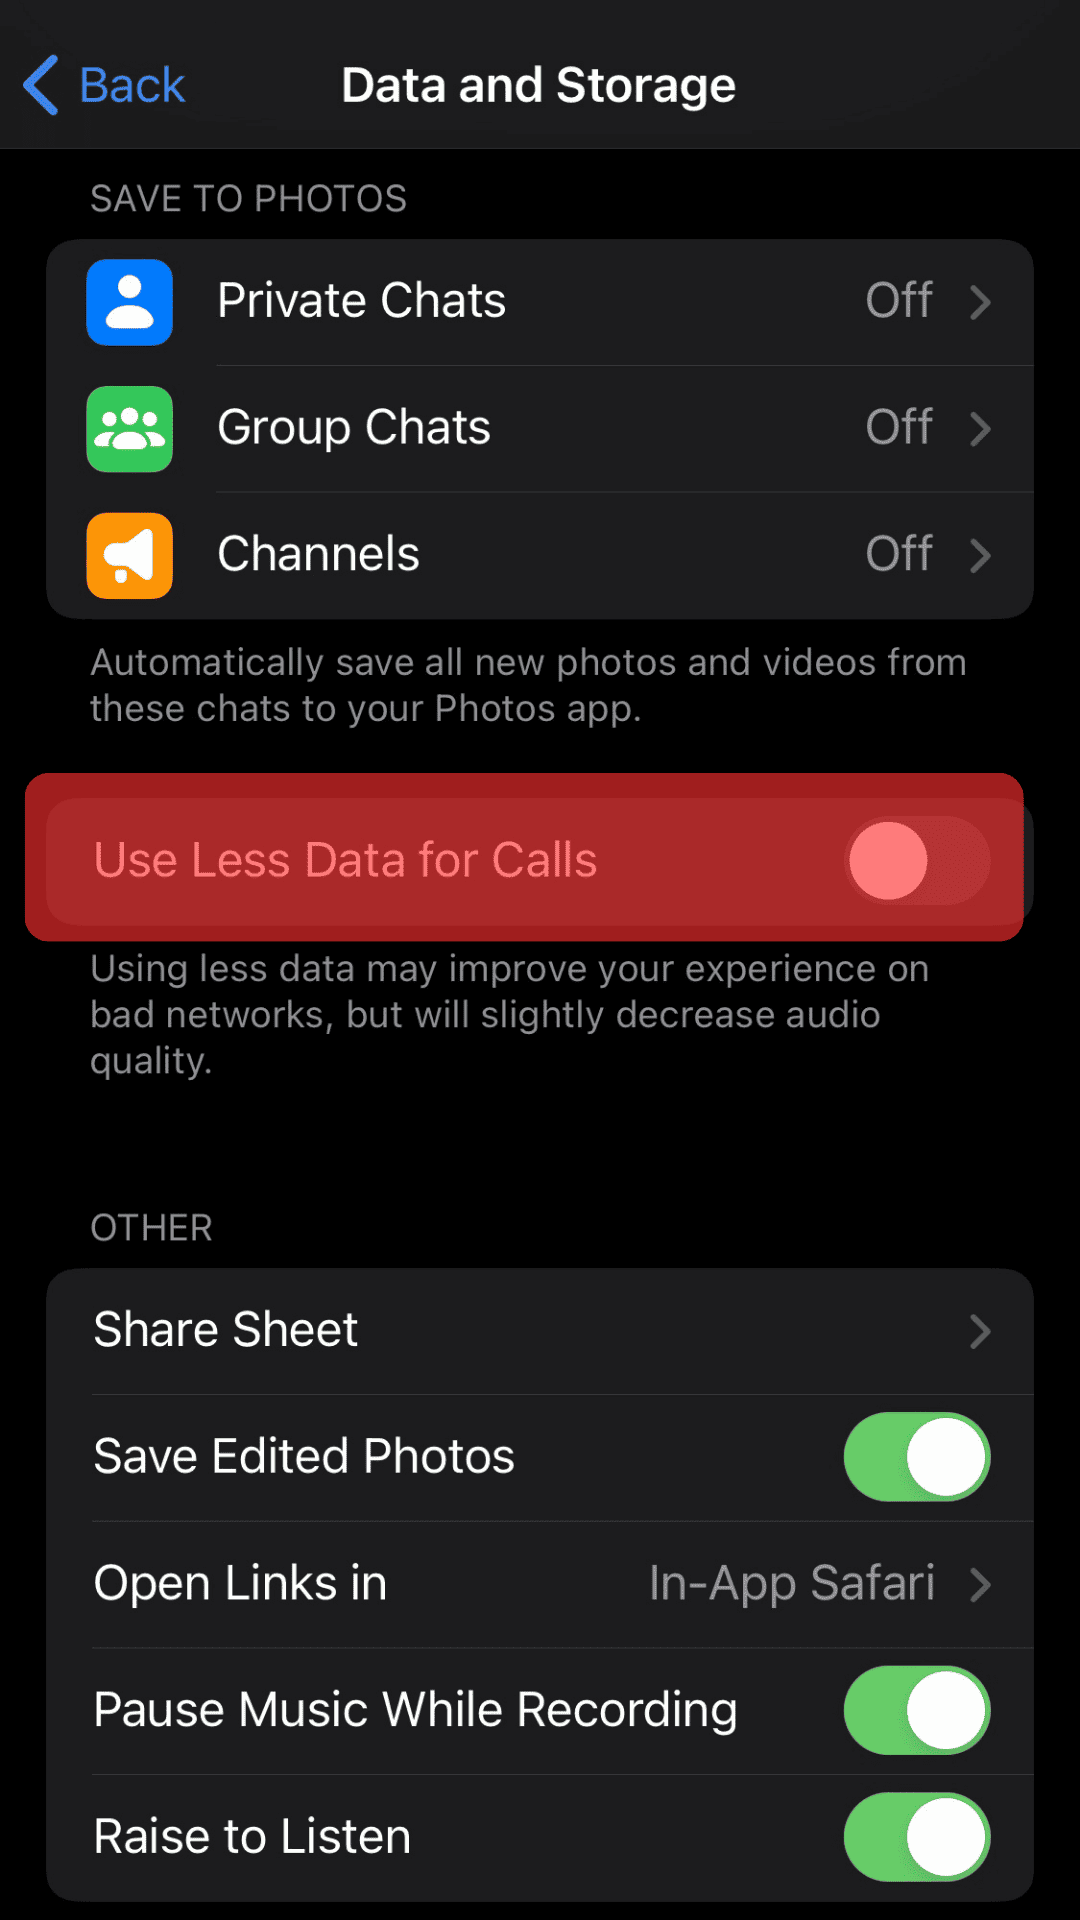 Turn On The ‘Use Less Data For Calls’ Setting.